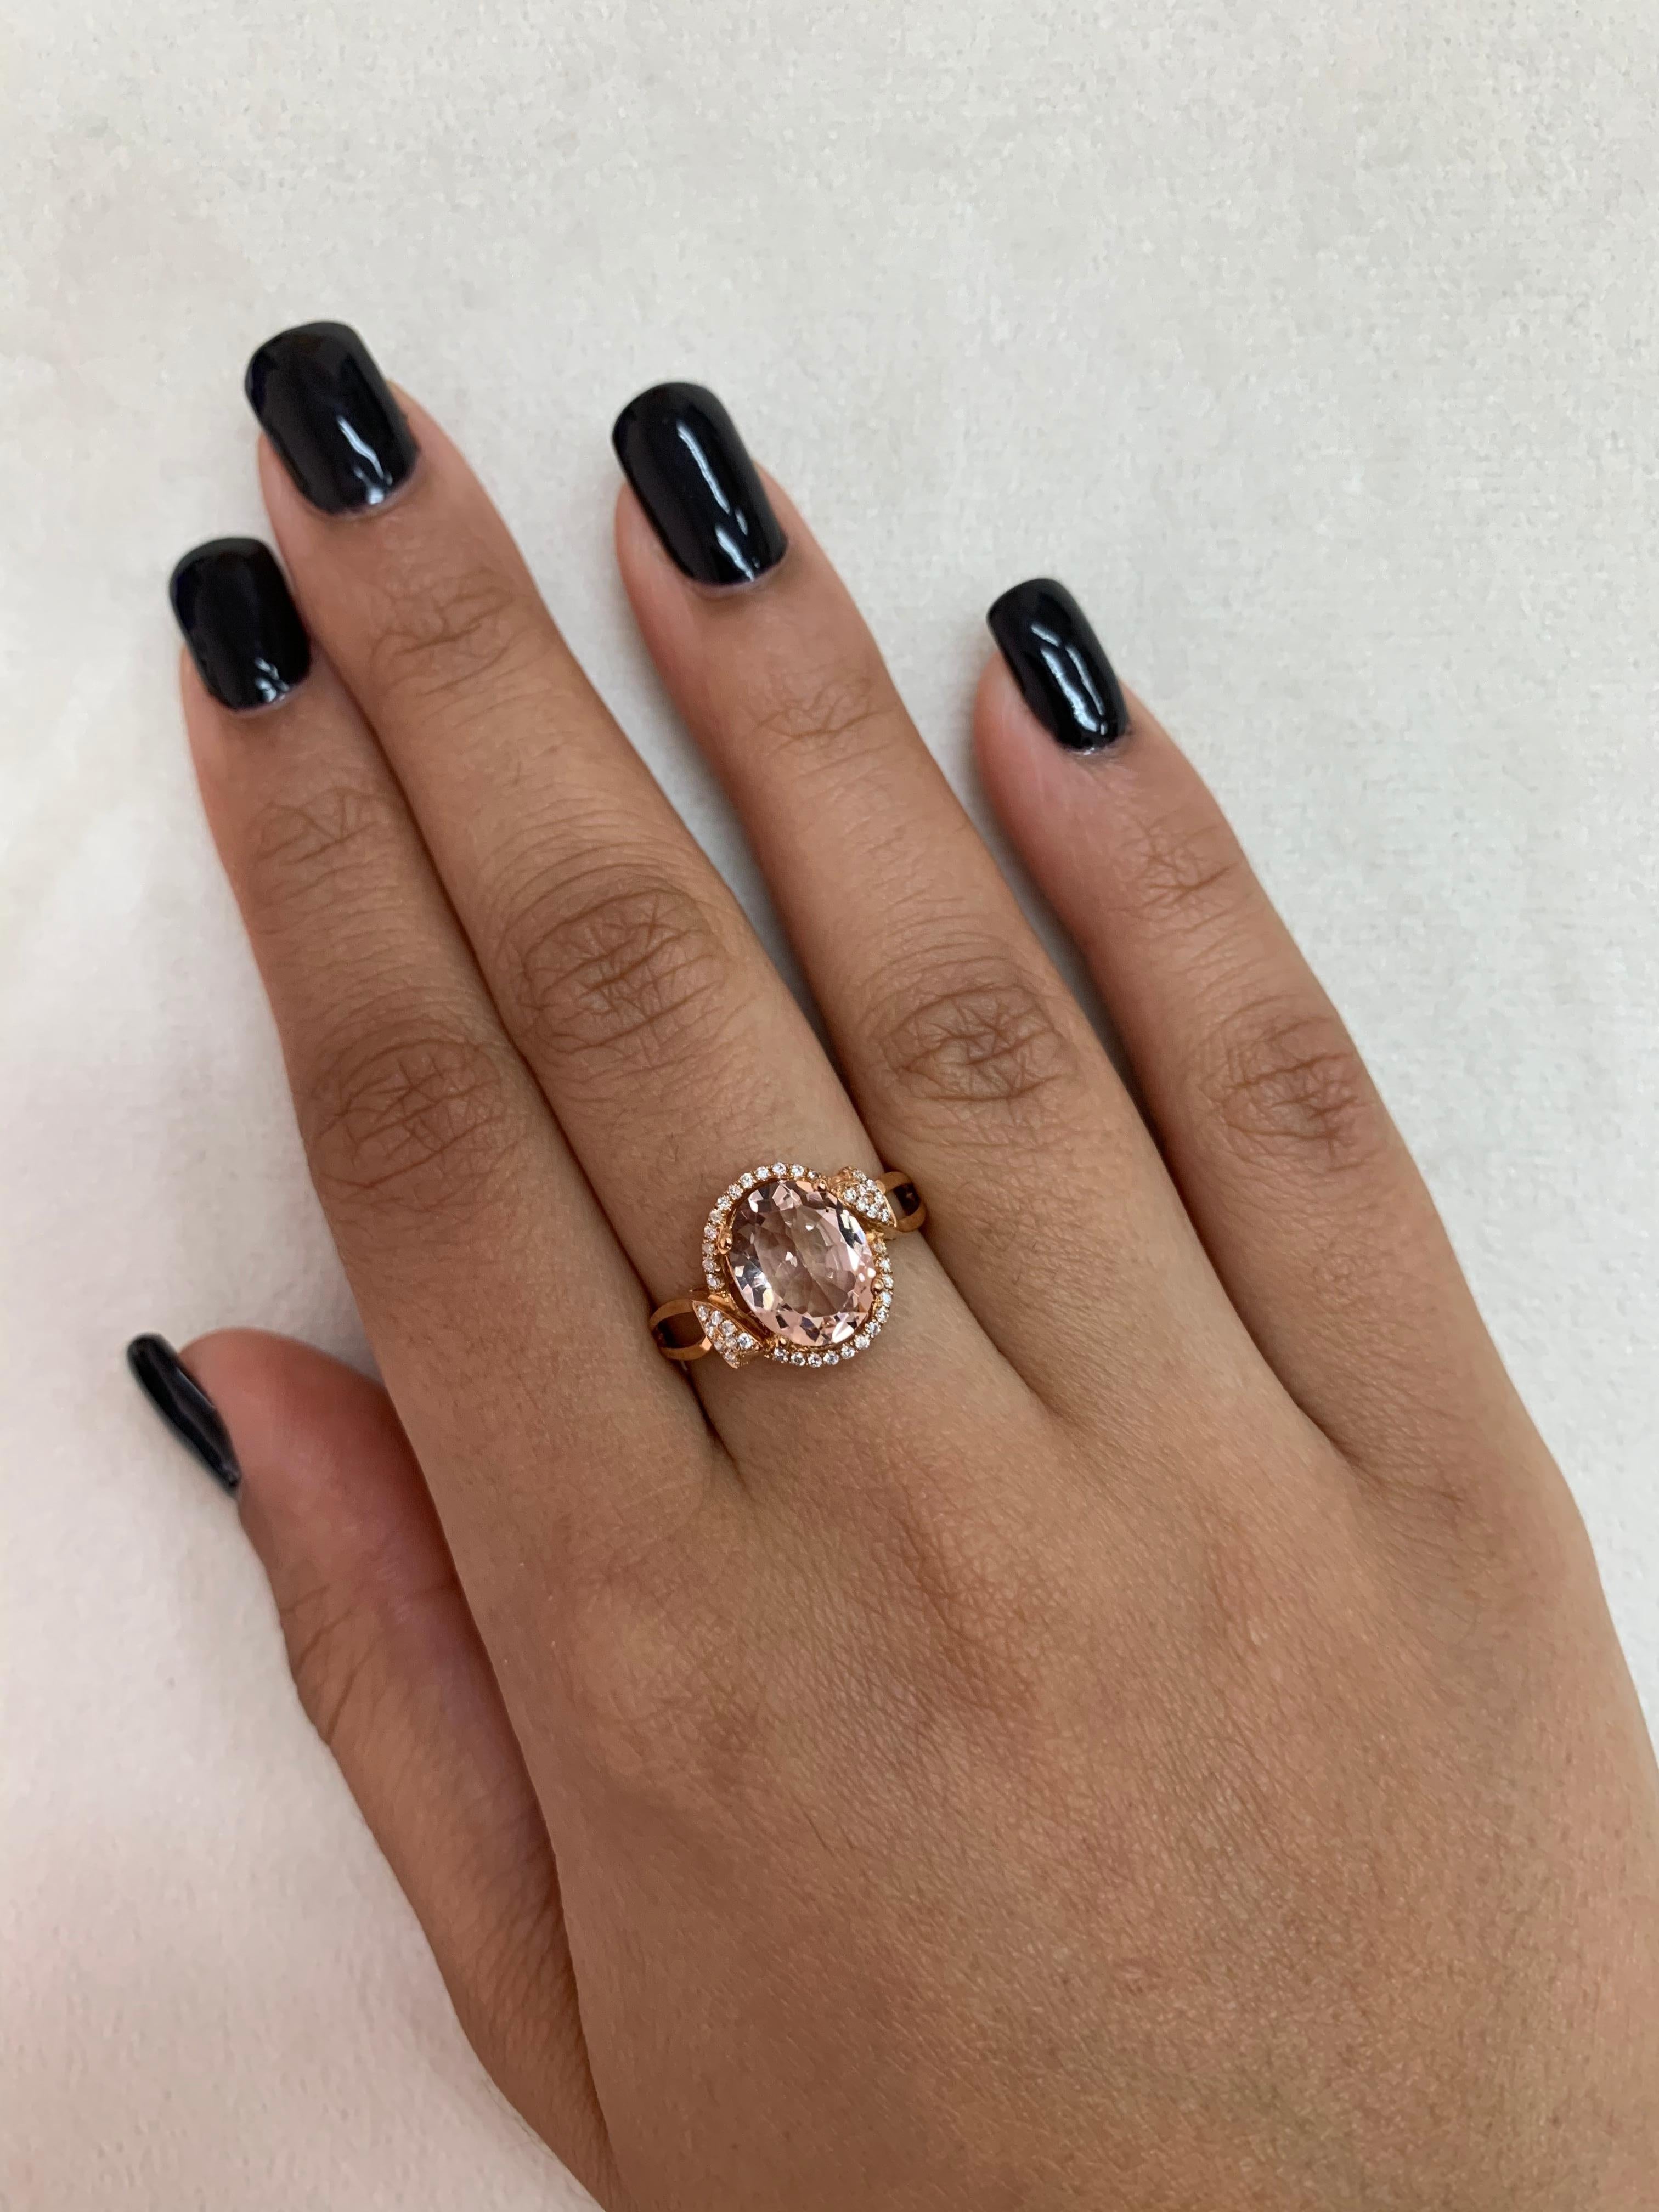 This collection features an array of magnificent morganites! Accented with diamonds these rings are made in rose gold and present a classic yet elegant look. 

Classic morganite ring in 18K rose gold with diamonds. 

Morganite: 2.4 carat oval